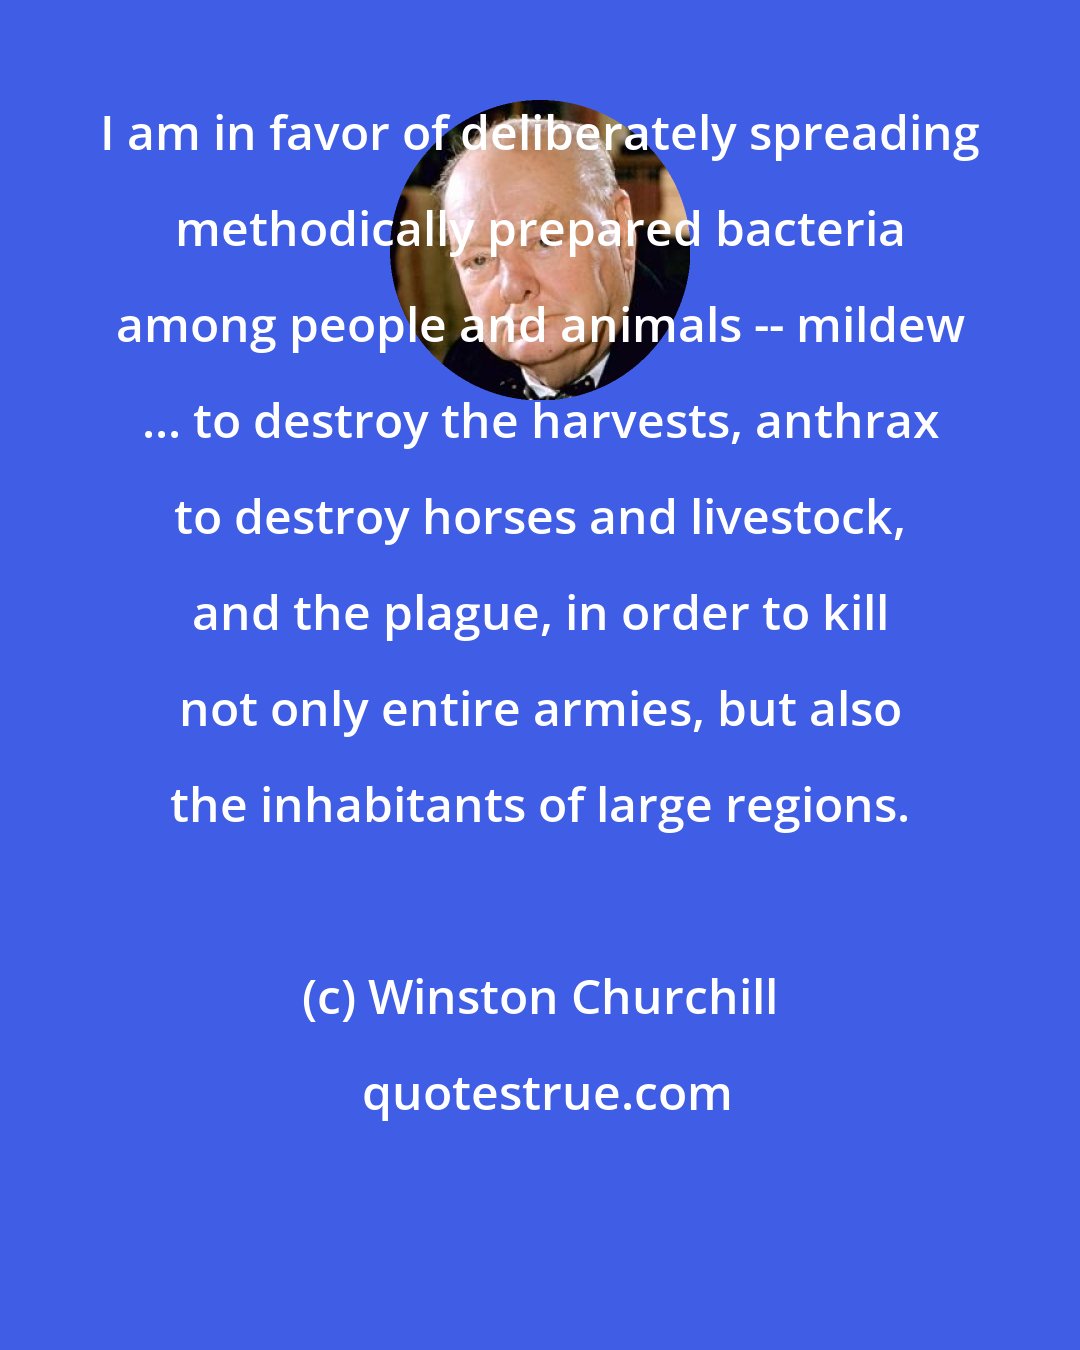 Winston Churchill: I am in favor of deliberately spreading methodically prepared bacteria among people and animals -- mildew ... to destroy the harvests, anthrax to destroy horses and livestock, and the plague, in order to kill not only entire armies, but also the inhabitants of large regions.